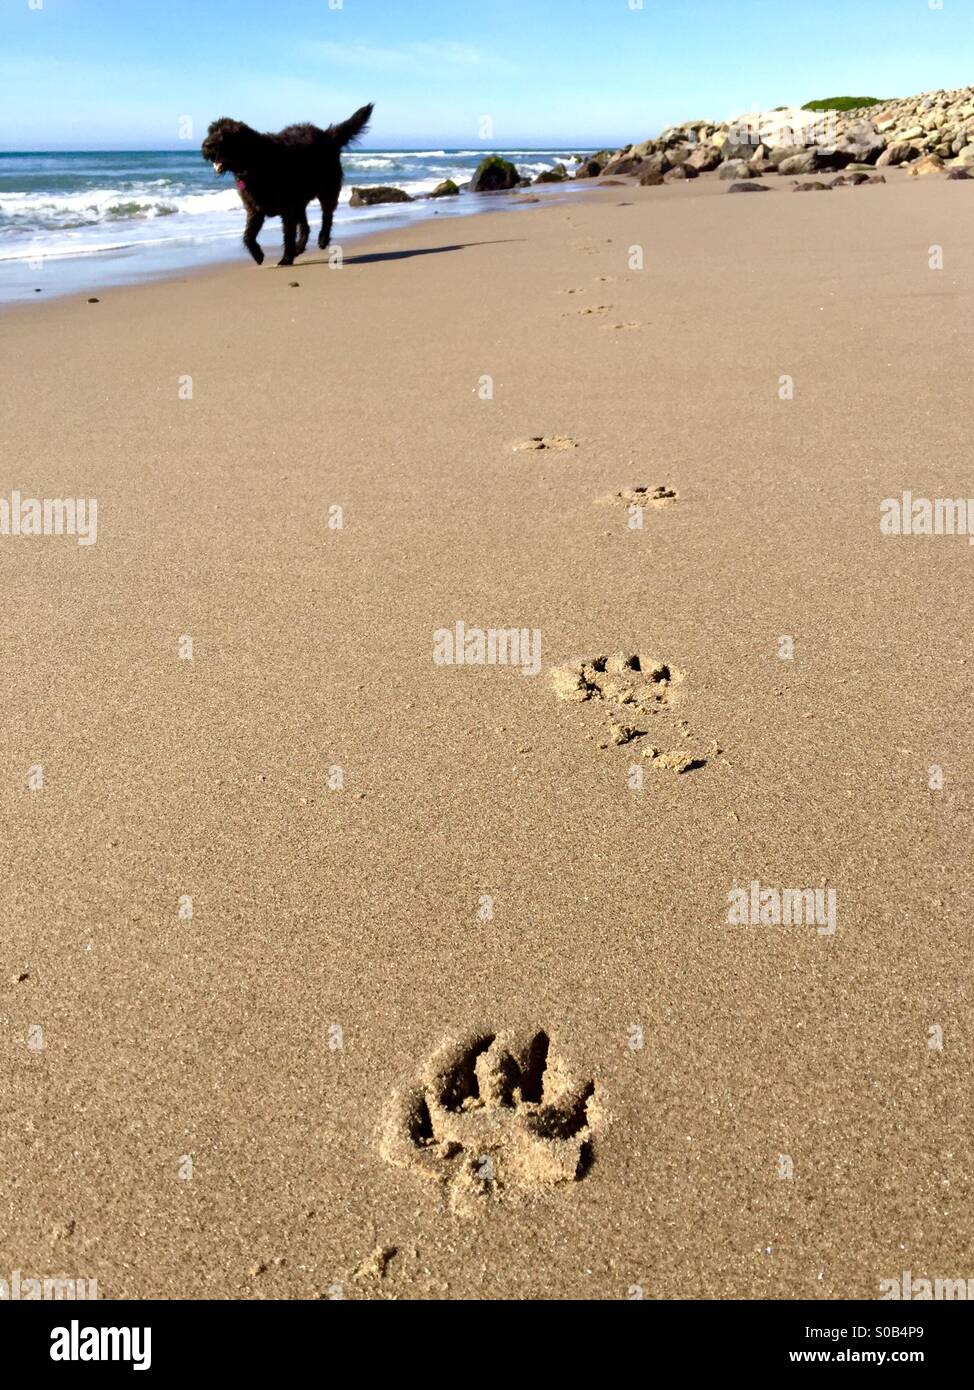 Dog paw prints on the beach and a black dog running in the background. Ventura, California USA. Stock Photo